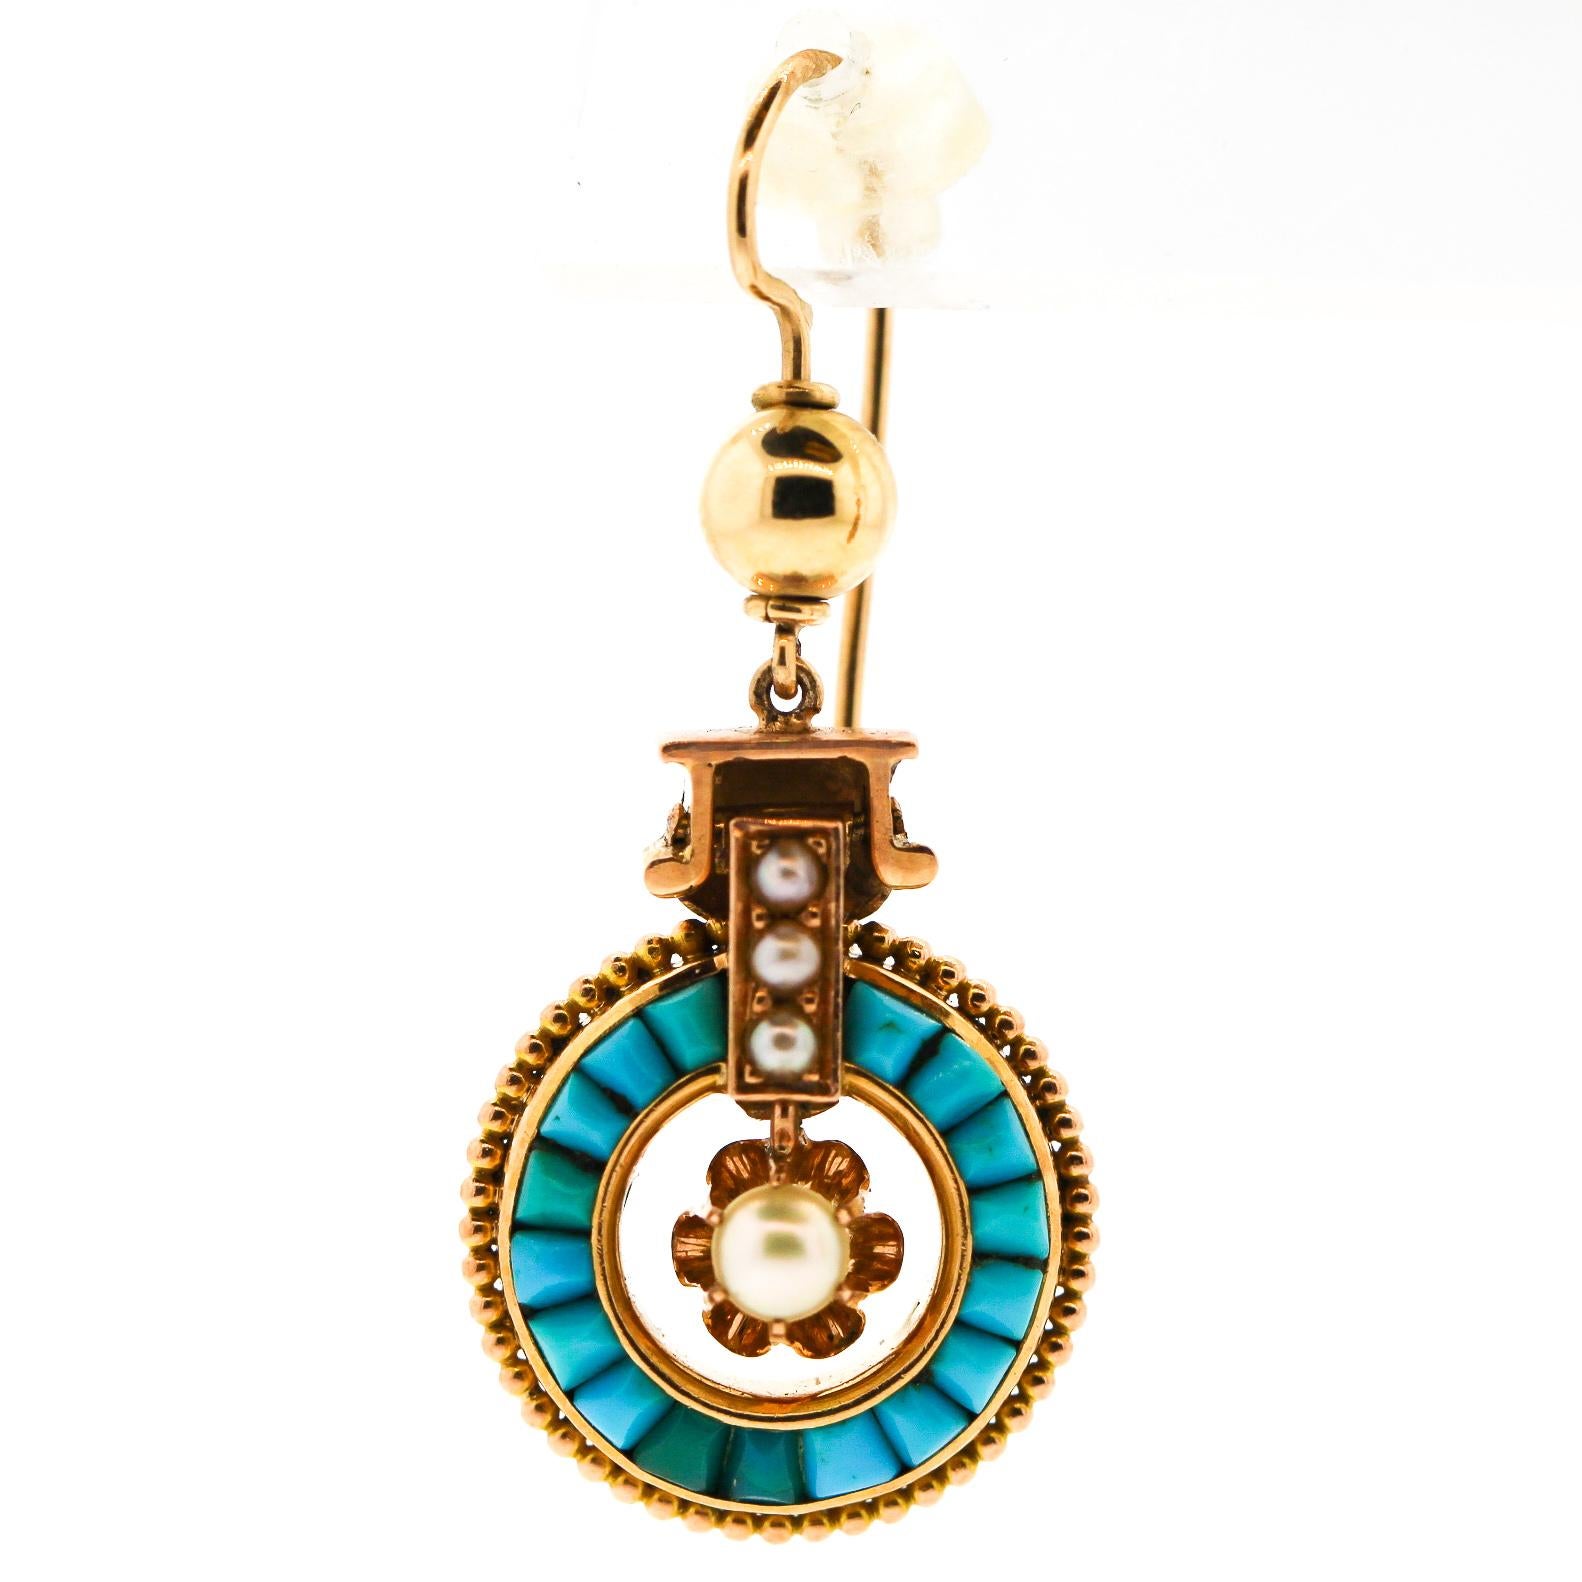 Bright and cheery Victorian 14k gold pendant earrings set with seed pearls, and calibre cut turquoise. The earrings date to about 1880, likely made in the United States. The earrings are hung on hoops that go through the ear, hanging from a hollow